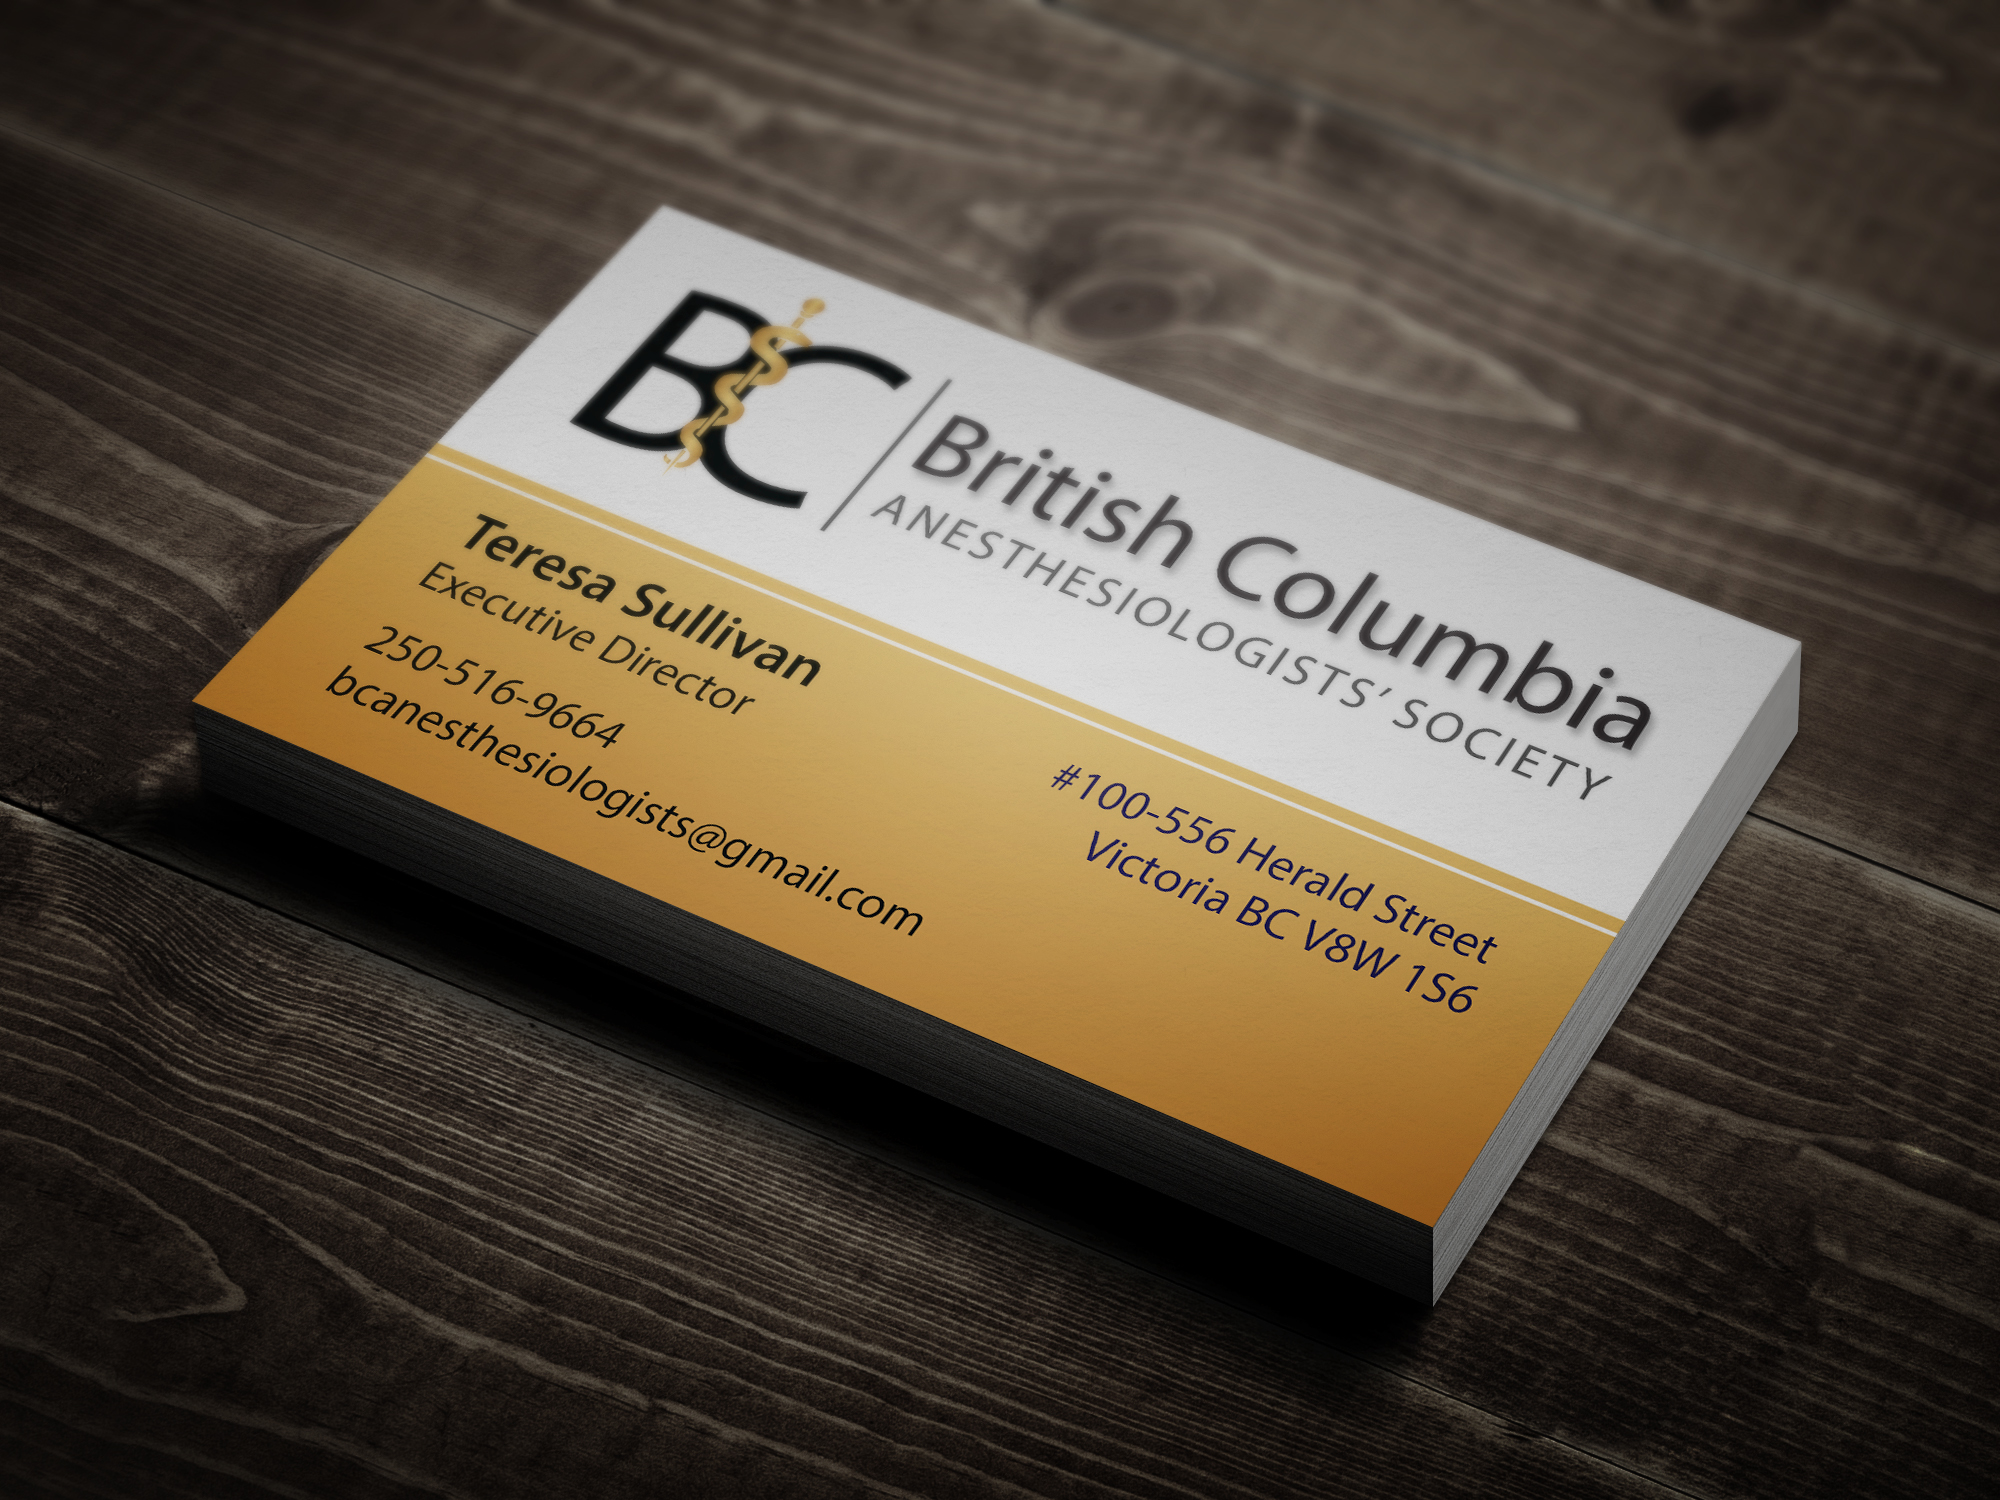  BC Anesthesiologists' Society Business Cards